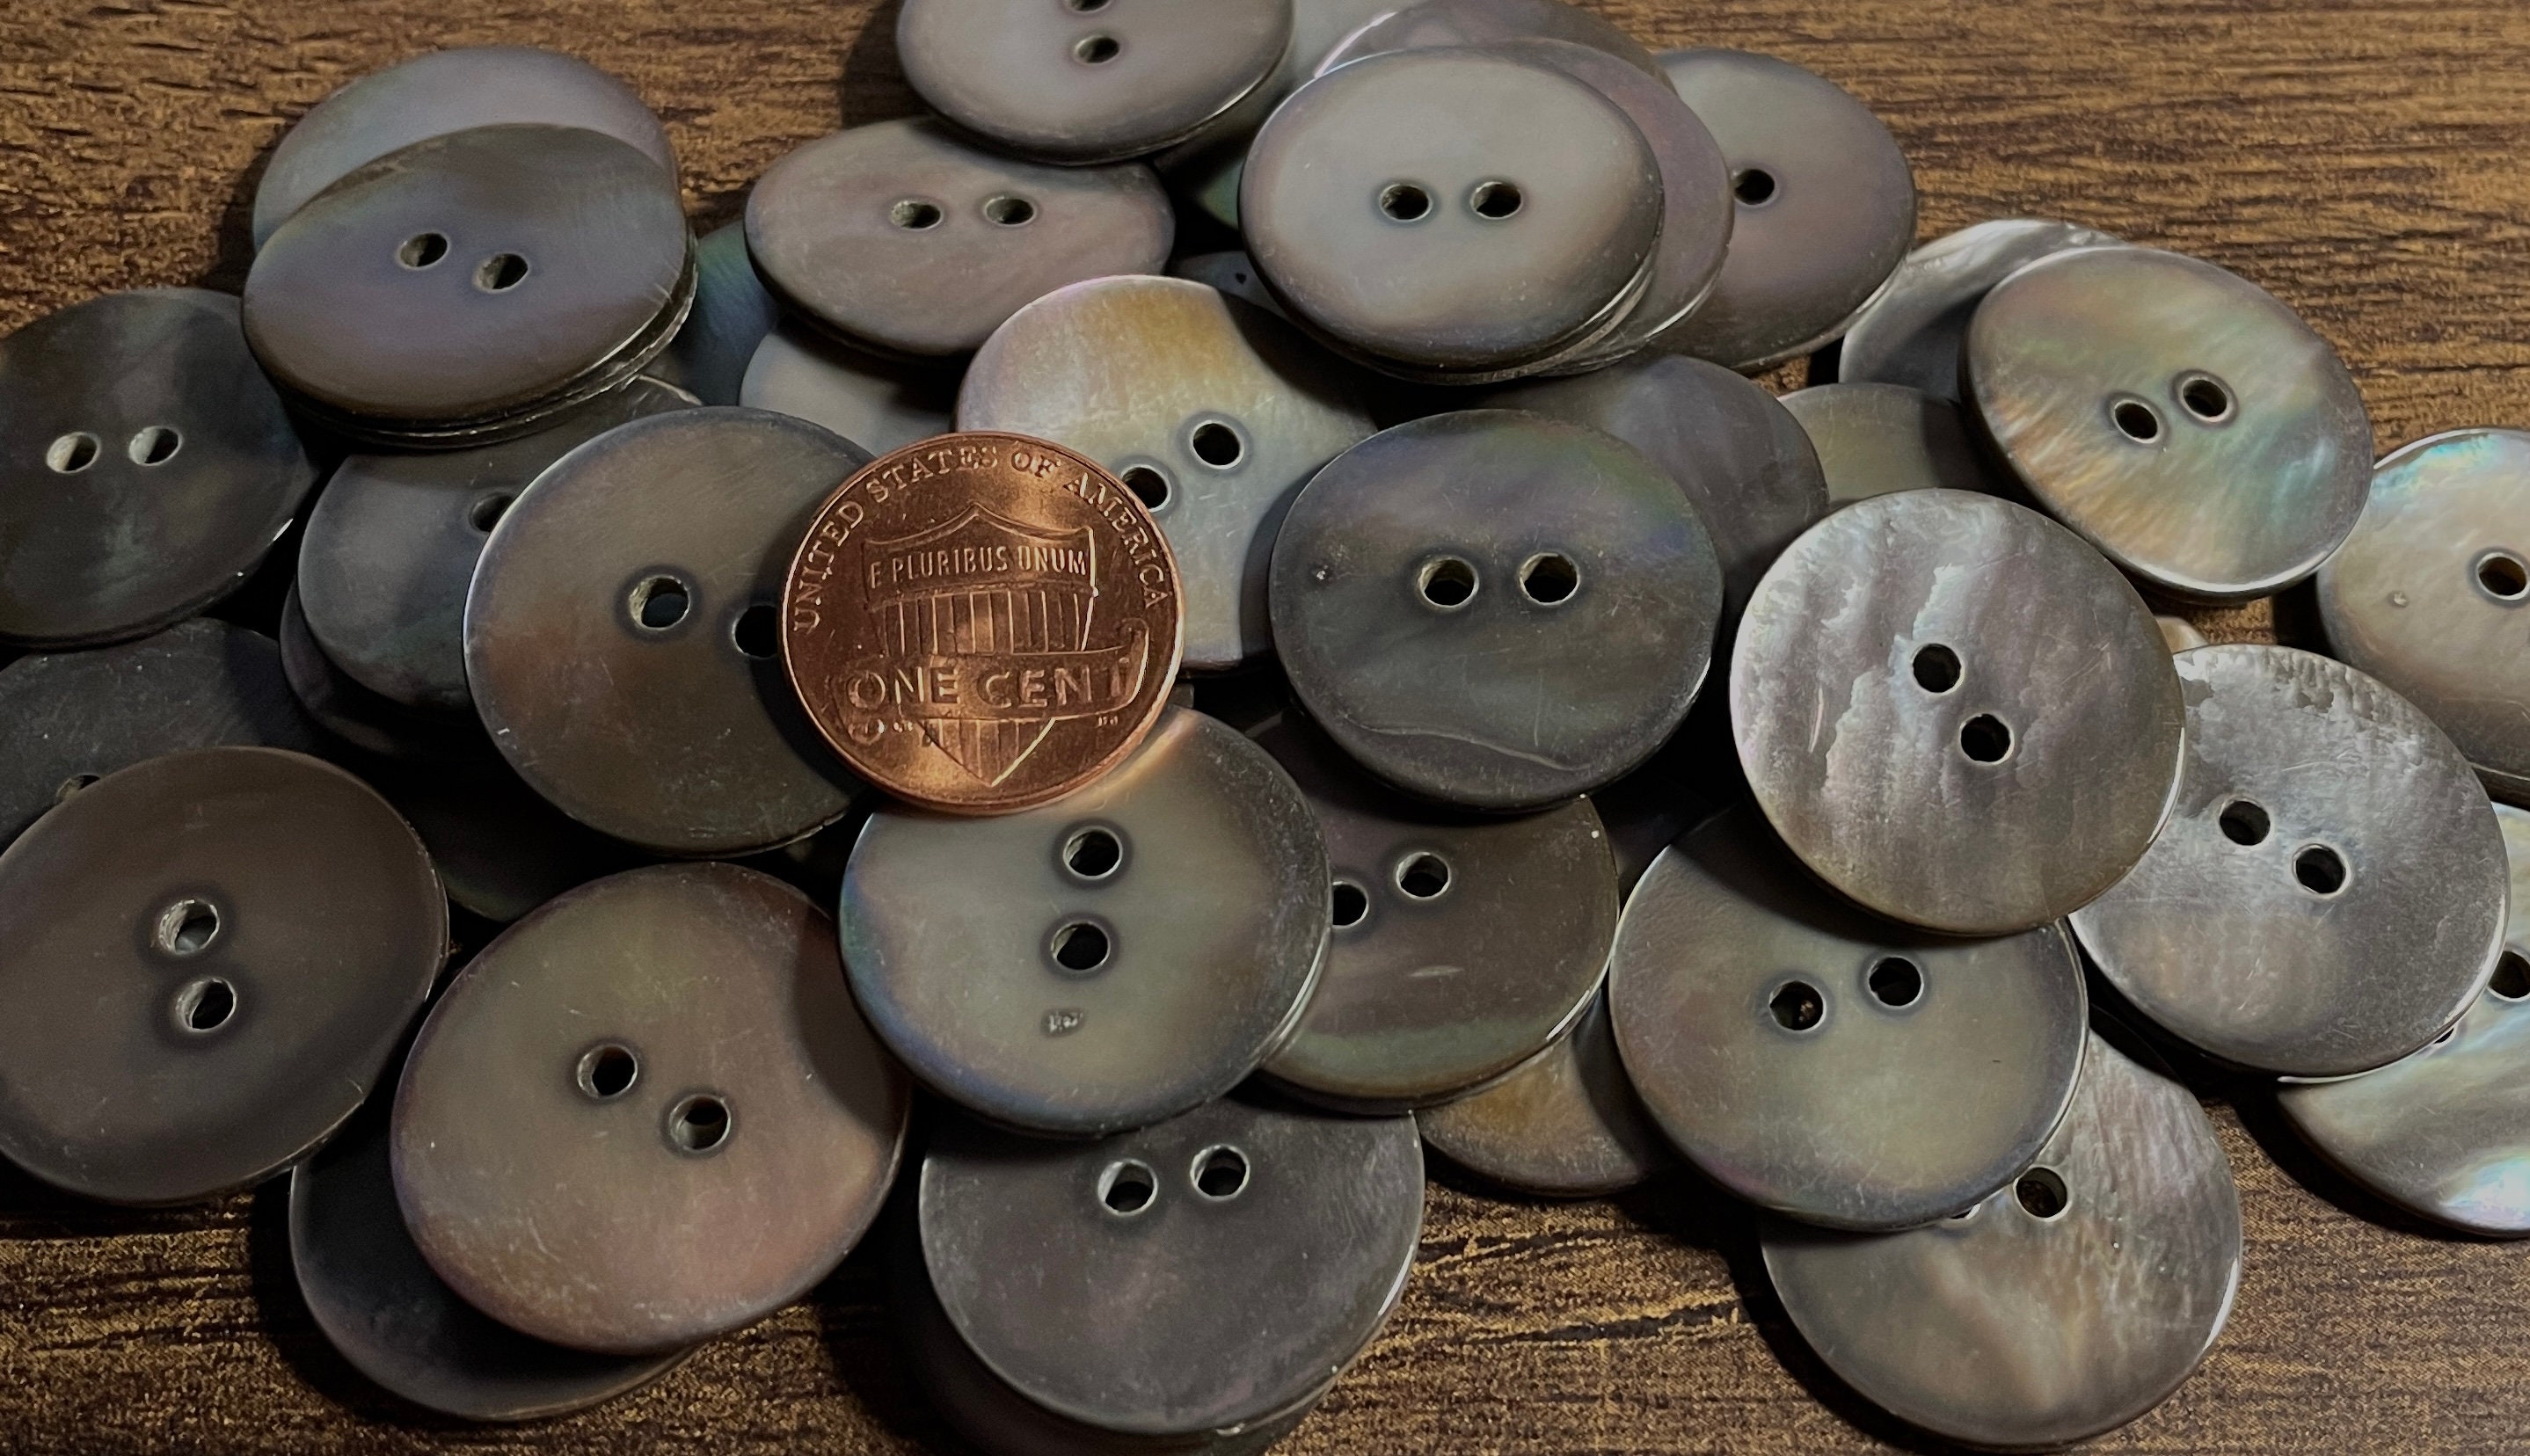 TITO Gray Blue Genuine Mother of Pearl Buttons for Shirts, Suits & Coats,  Made in Italy